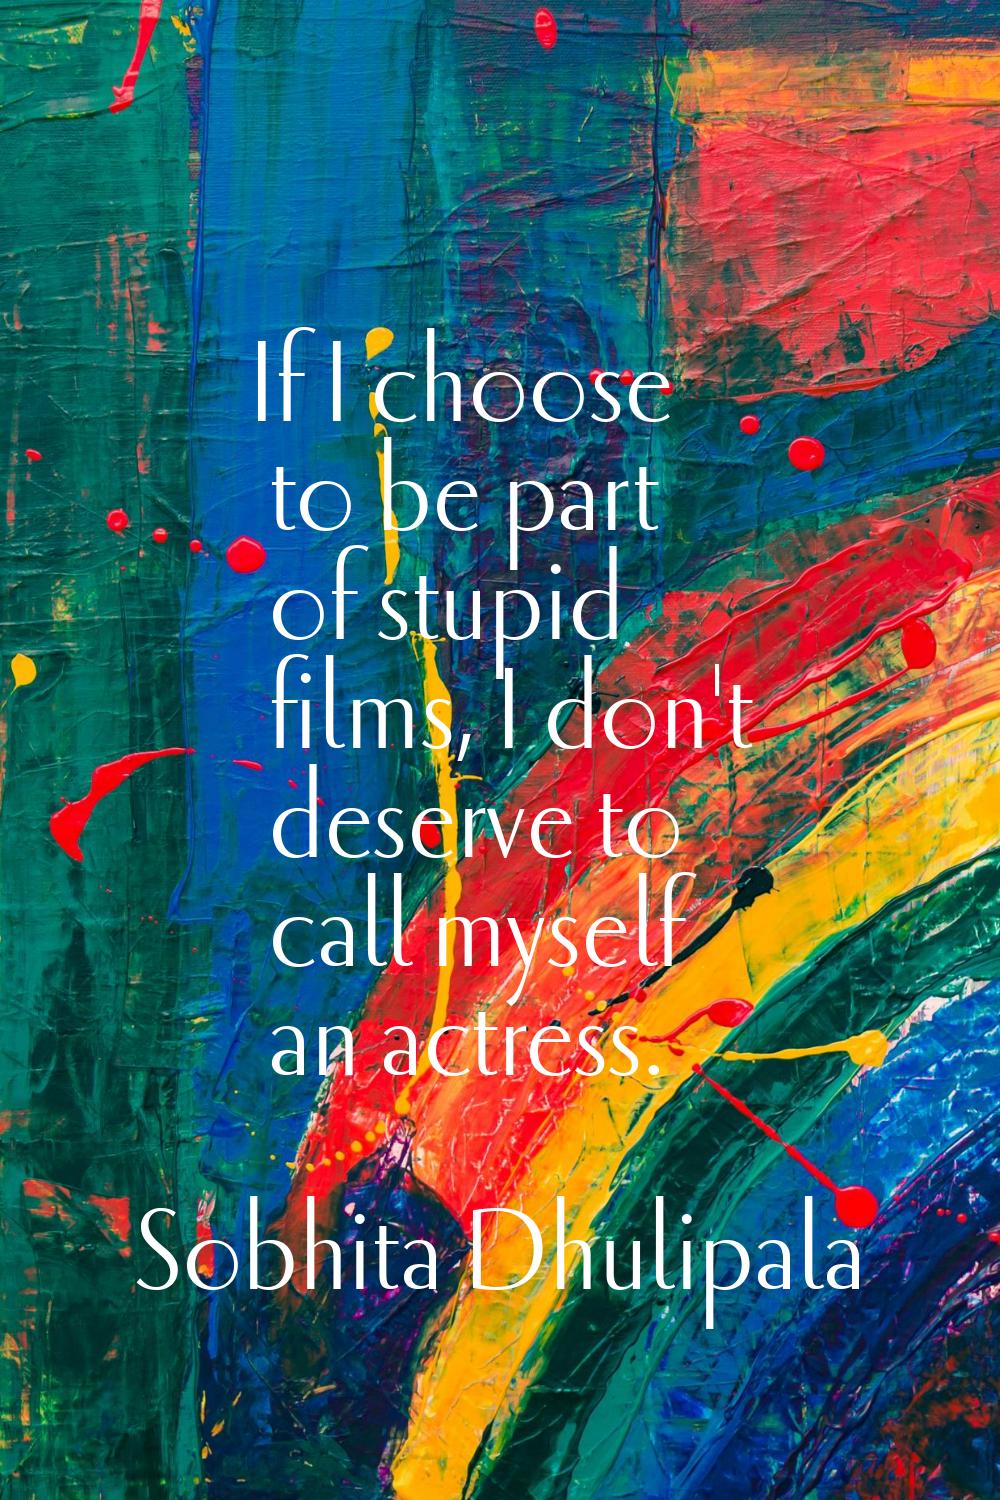 If I choose to be part of stupid films, I don't deserve to call myself an actress.